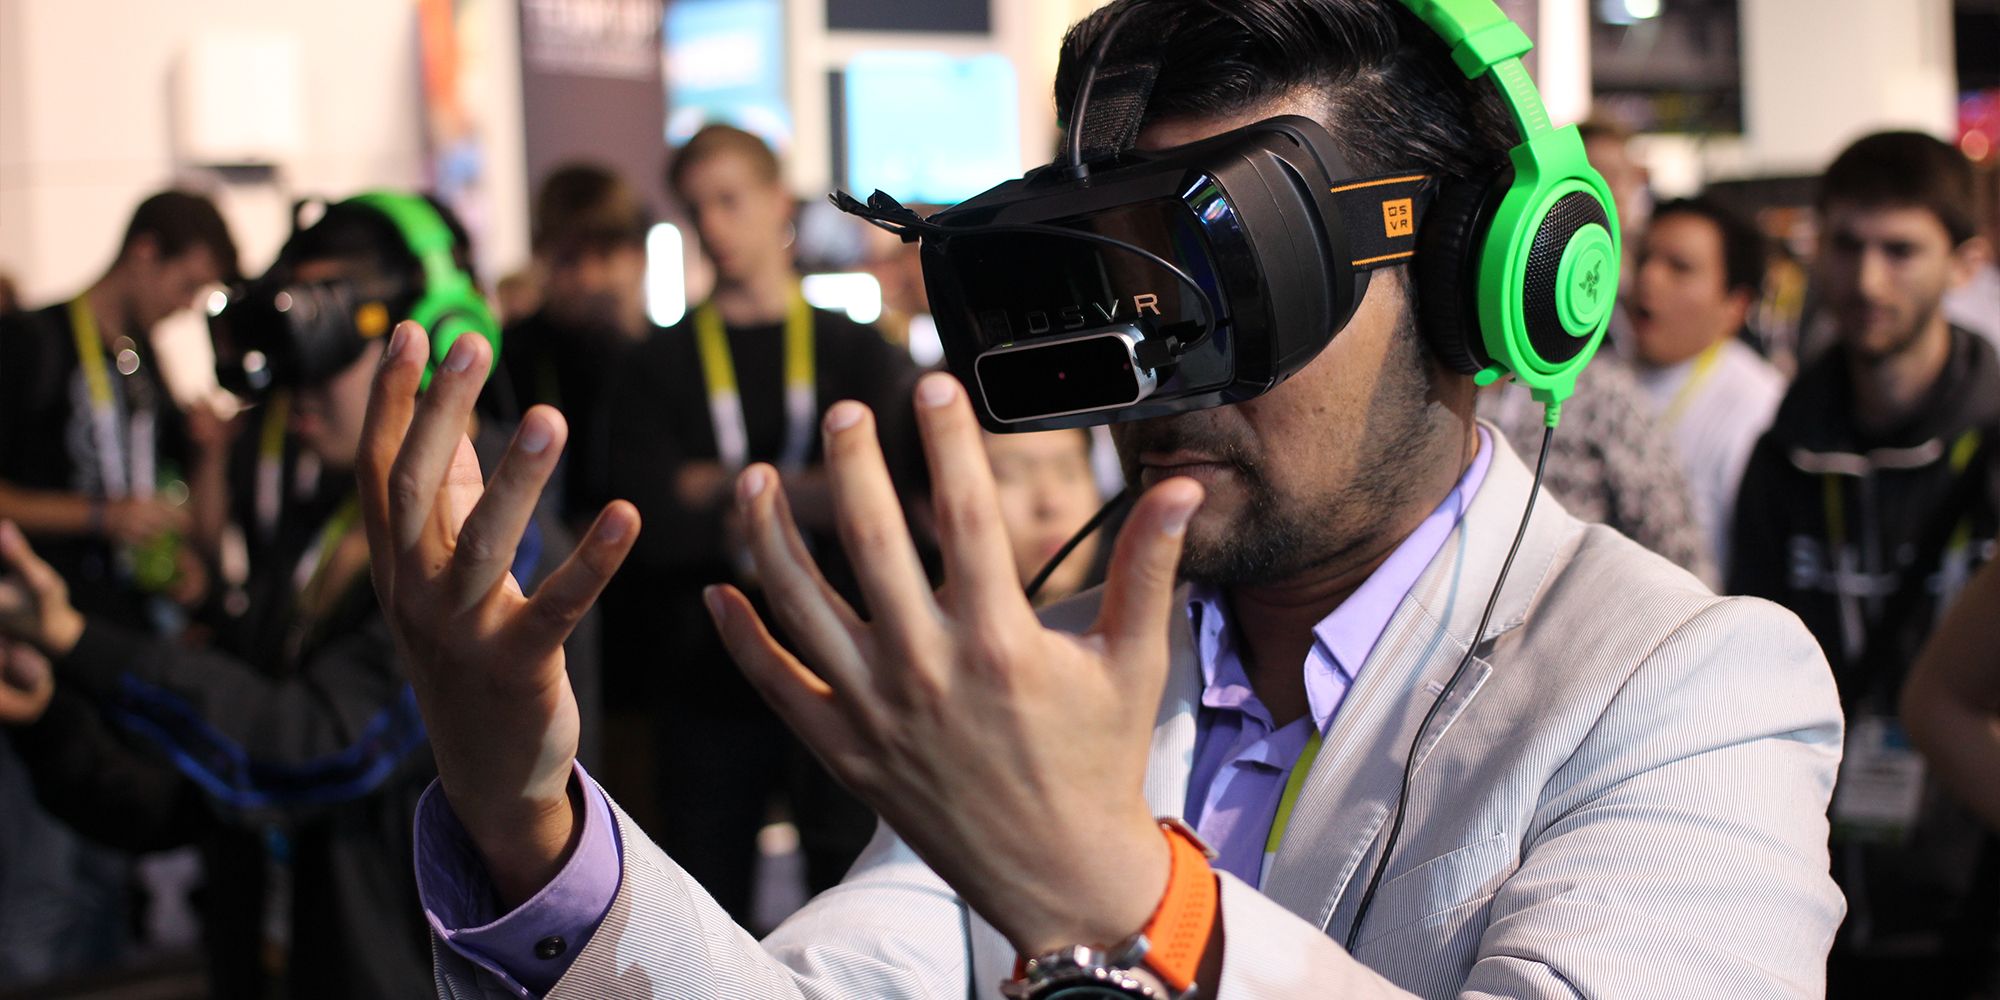 Man holds his hands out in front of his face while wearing VR headset among crowd of onlookers, beside another man in a VR headset